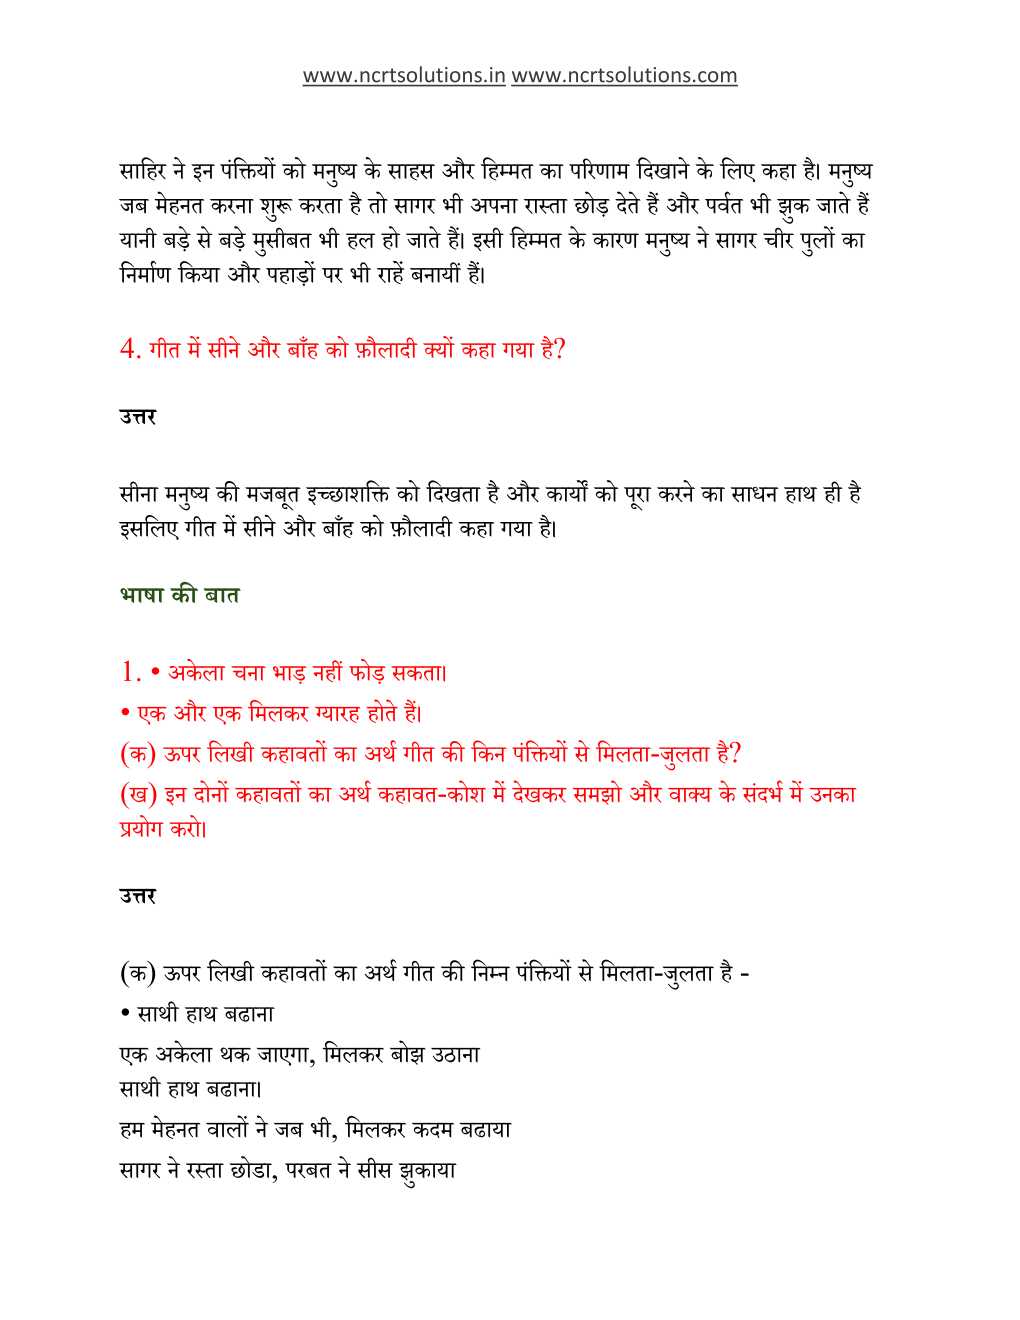 NCERT Solutions For Class 6 Hindi Vasant Chapter 7